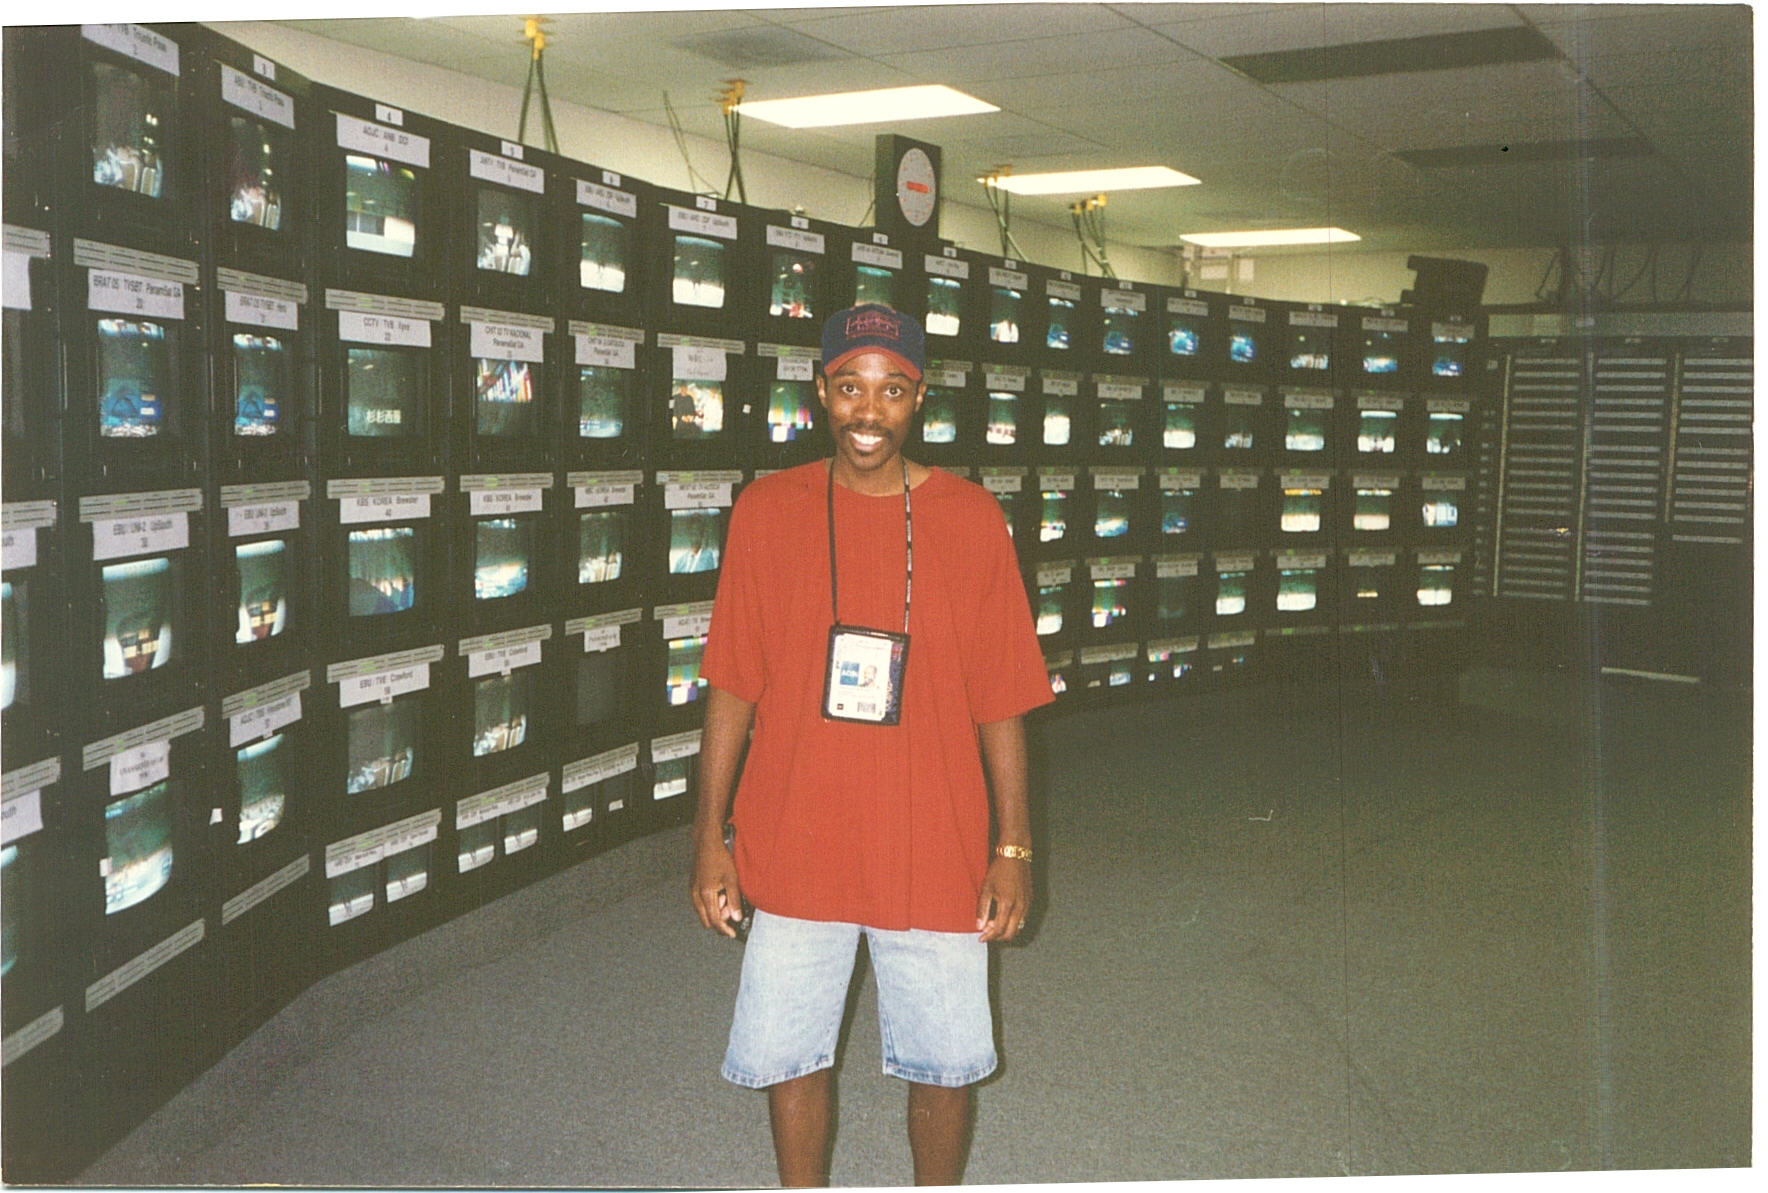 Editing for The European Broadcaster's Union at the 1996 Olympic Games in Atlanta GA.